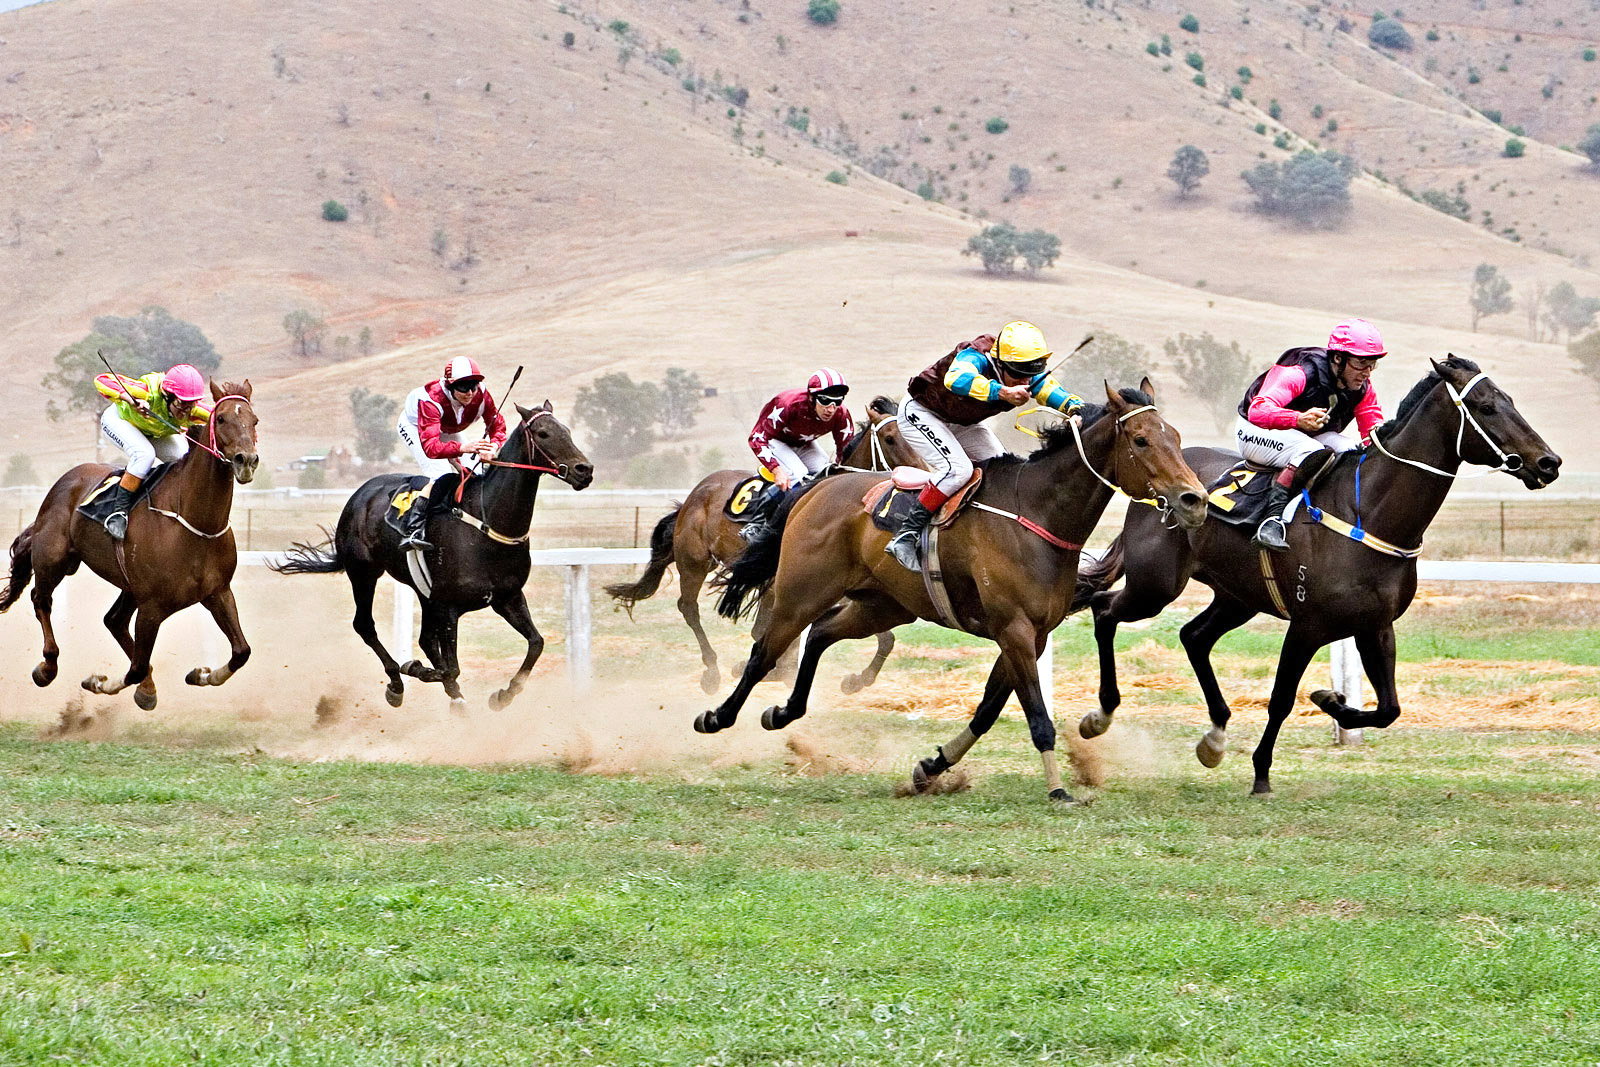 The Tradition and Pageantry of Horse Racing in Australia